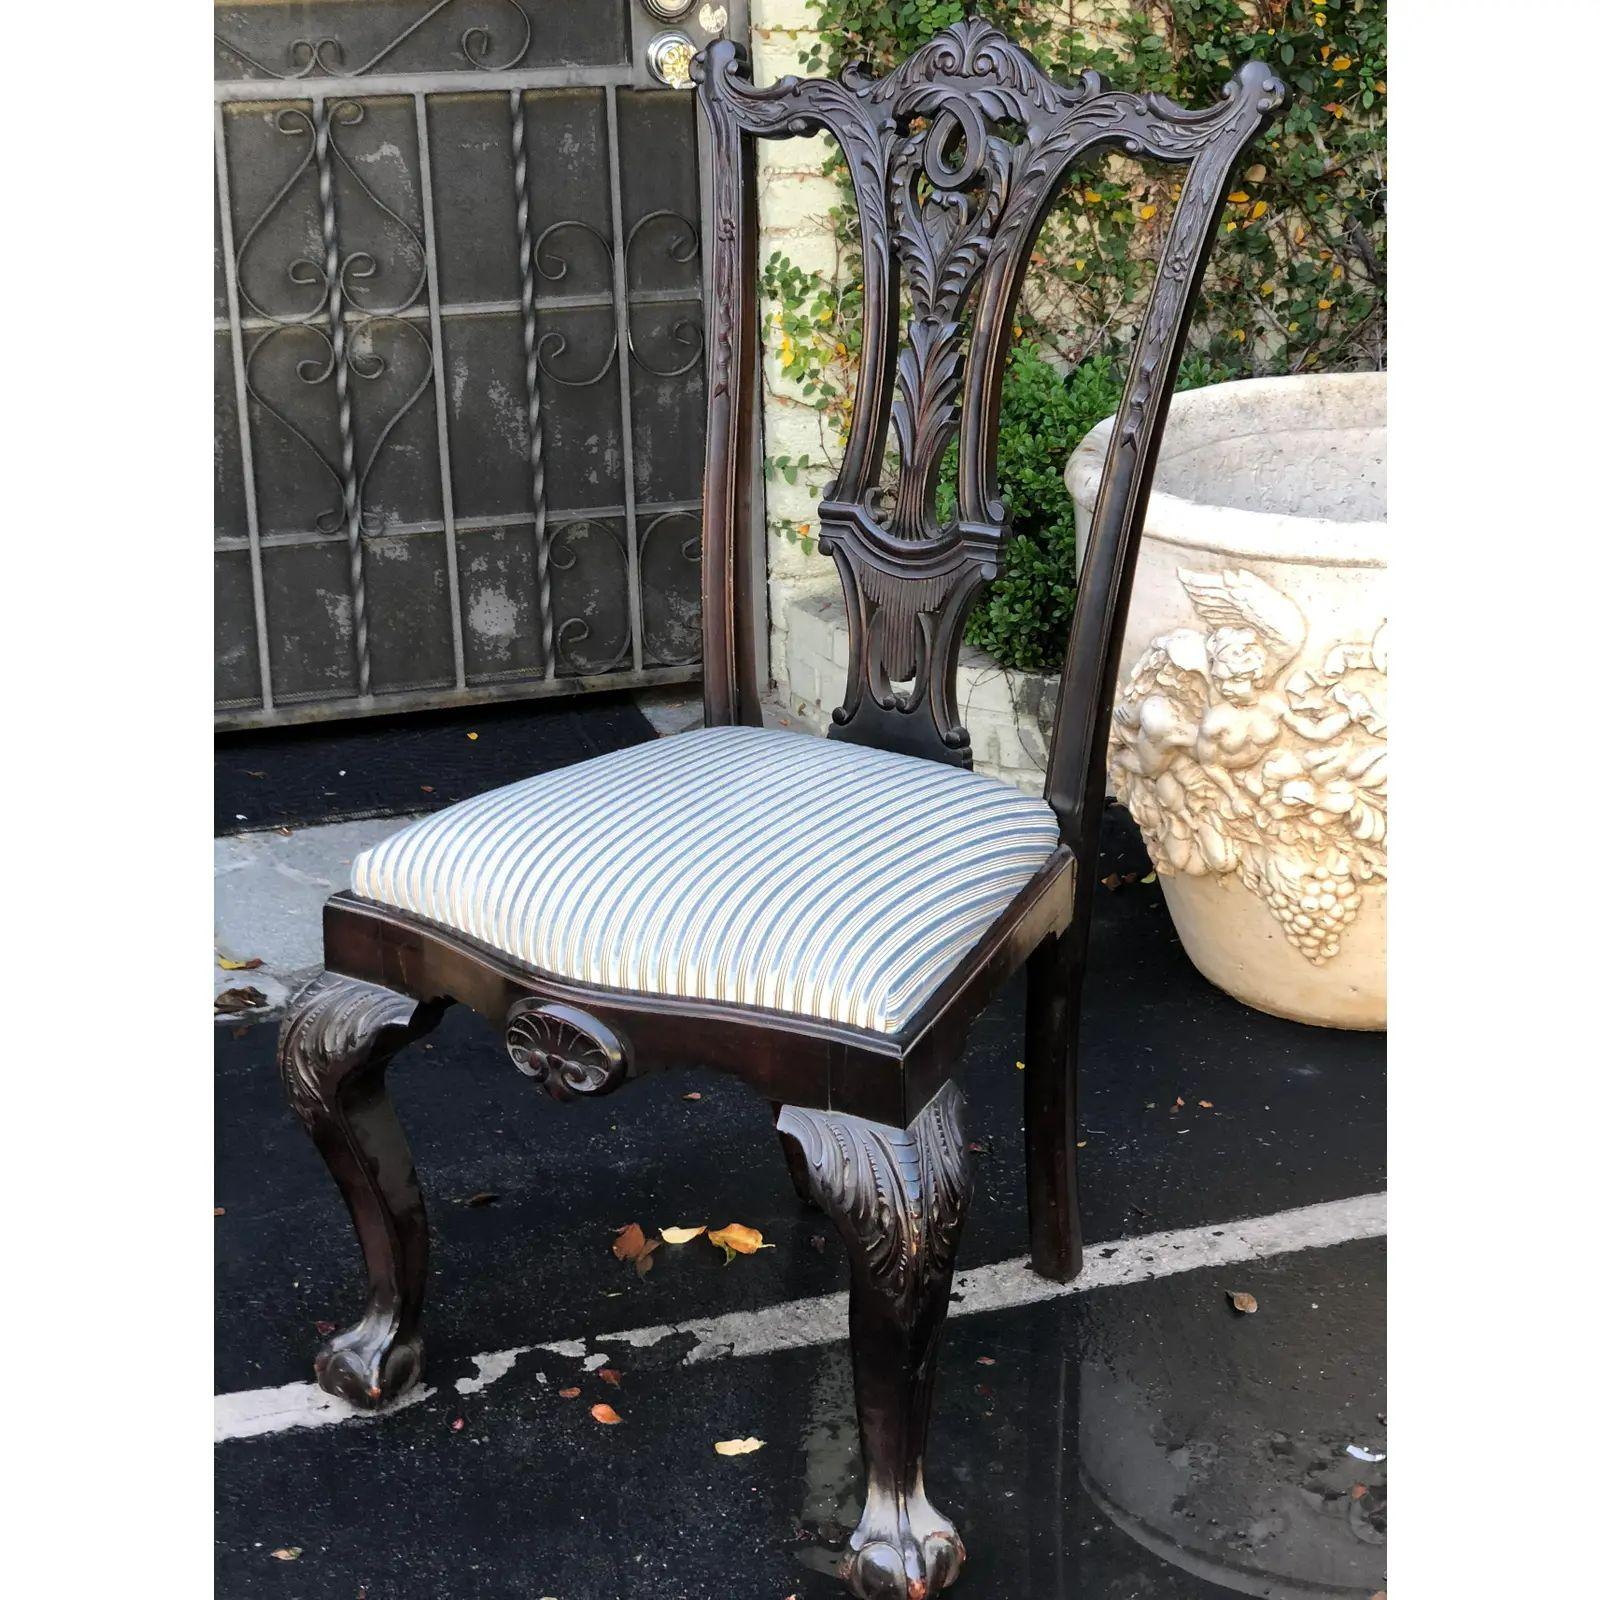 Antique 19th Century Carved Chippendale Style Desk or Side Chair

Additional information: 
Materials: Wood
Color: Ebony
Period: 19th Century
Styles: Chippendale
Number of Seats: 1
Item Type: Vintage, Antique or Pre-owned
Dimensions: 23.75ʺW × 24ʺD ×